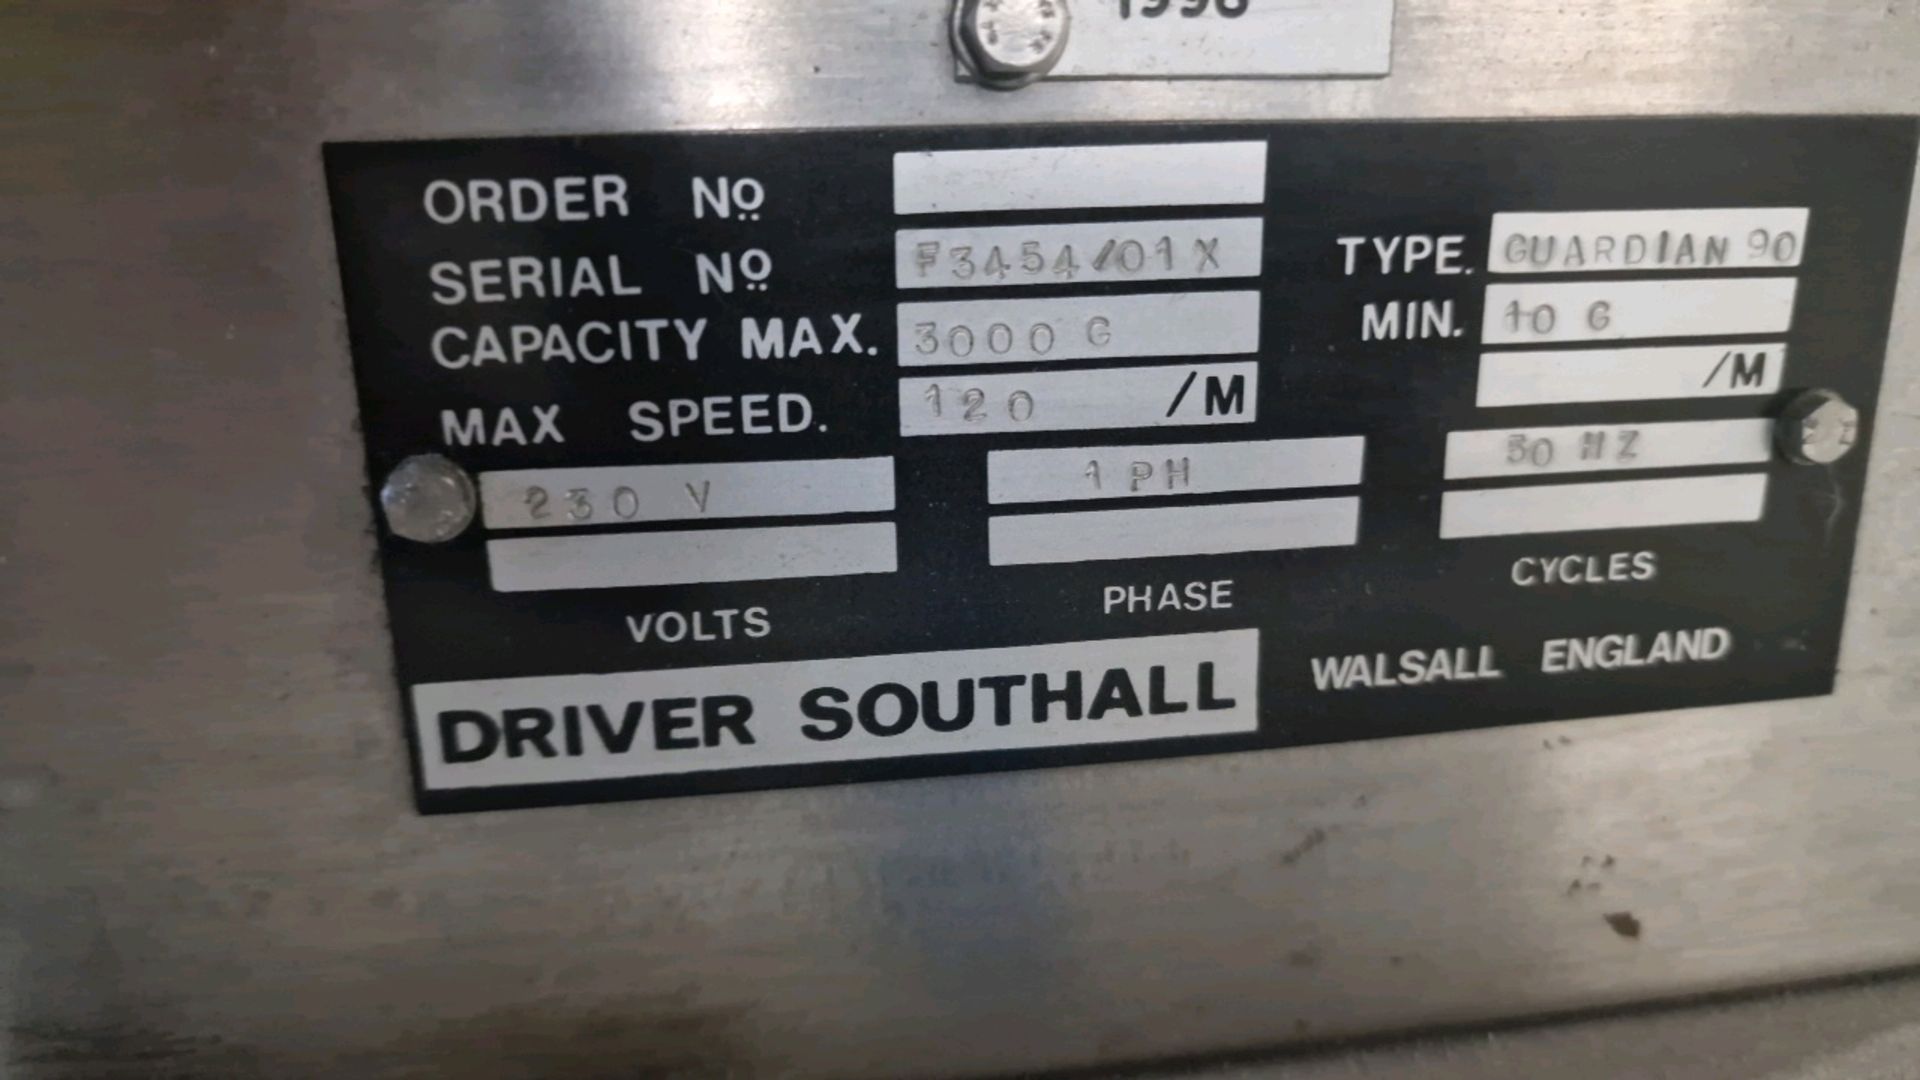 Driver Southall Guardian 90 Check Max Weight 3000g - Image 5 of 6